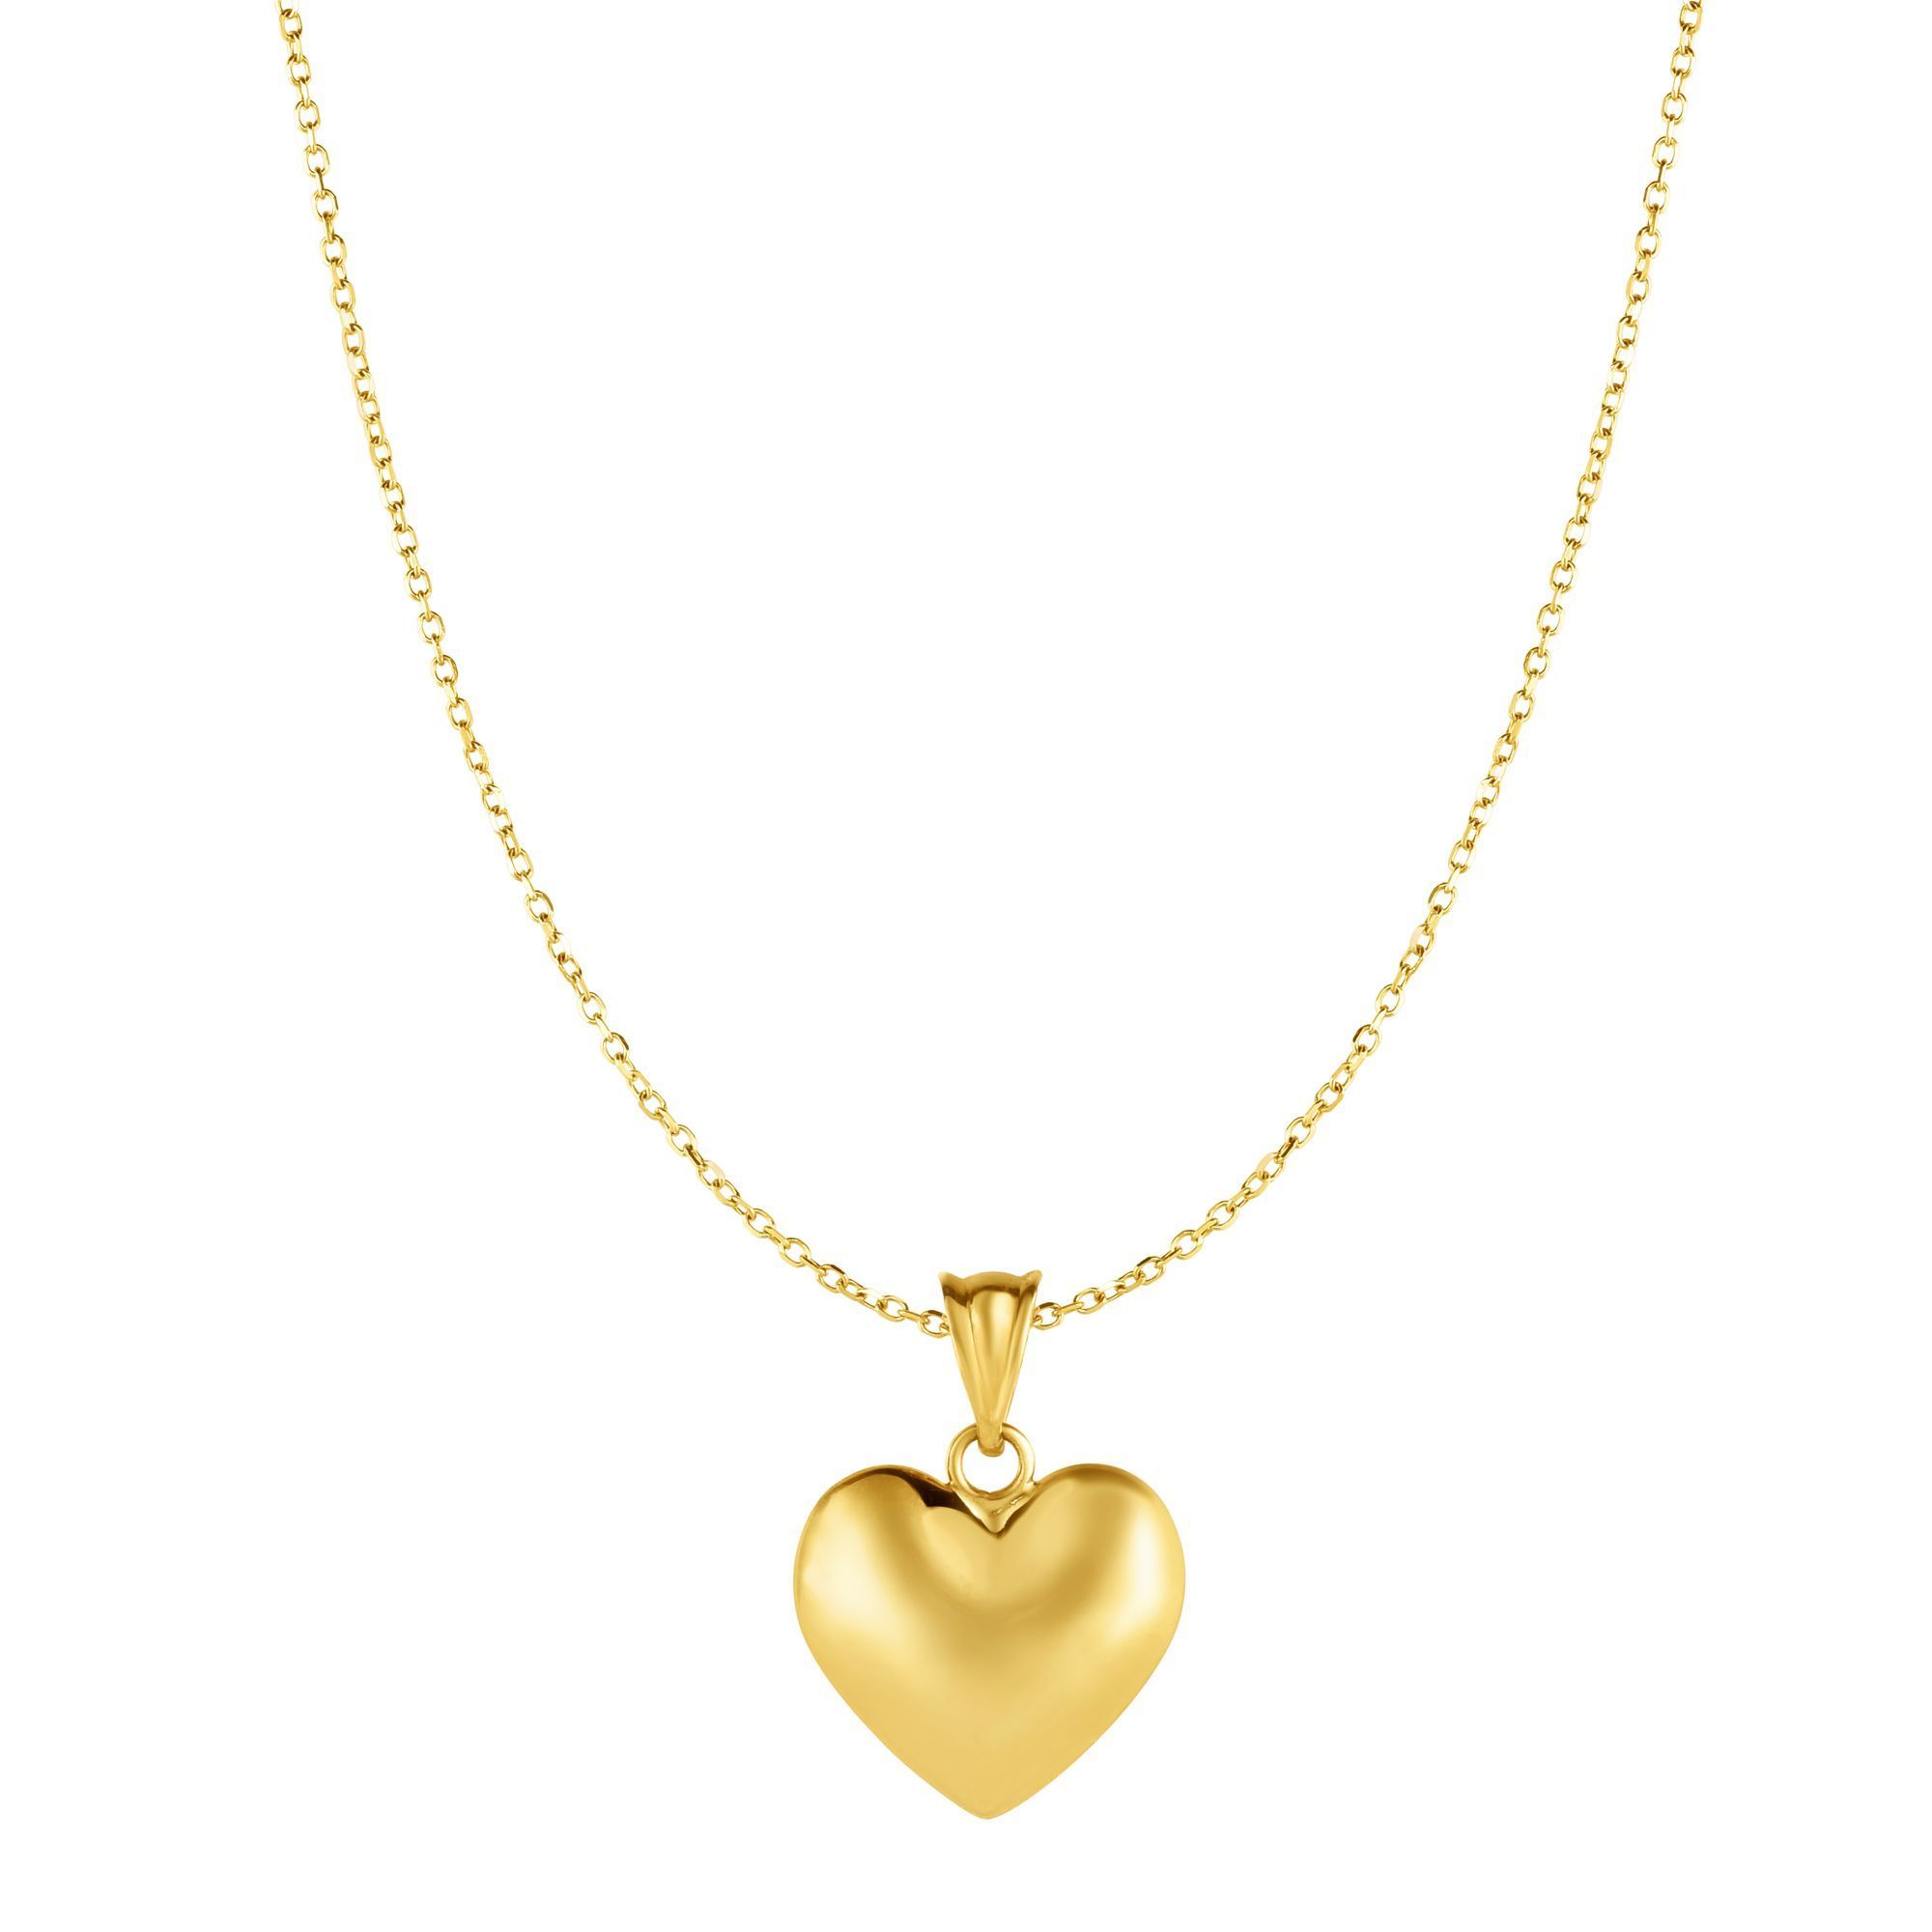 Puffy Heart Necklace Silver – Vi Ling